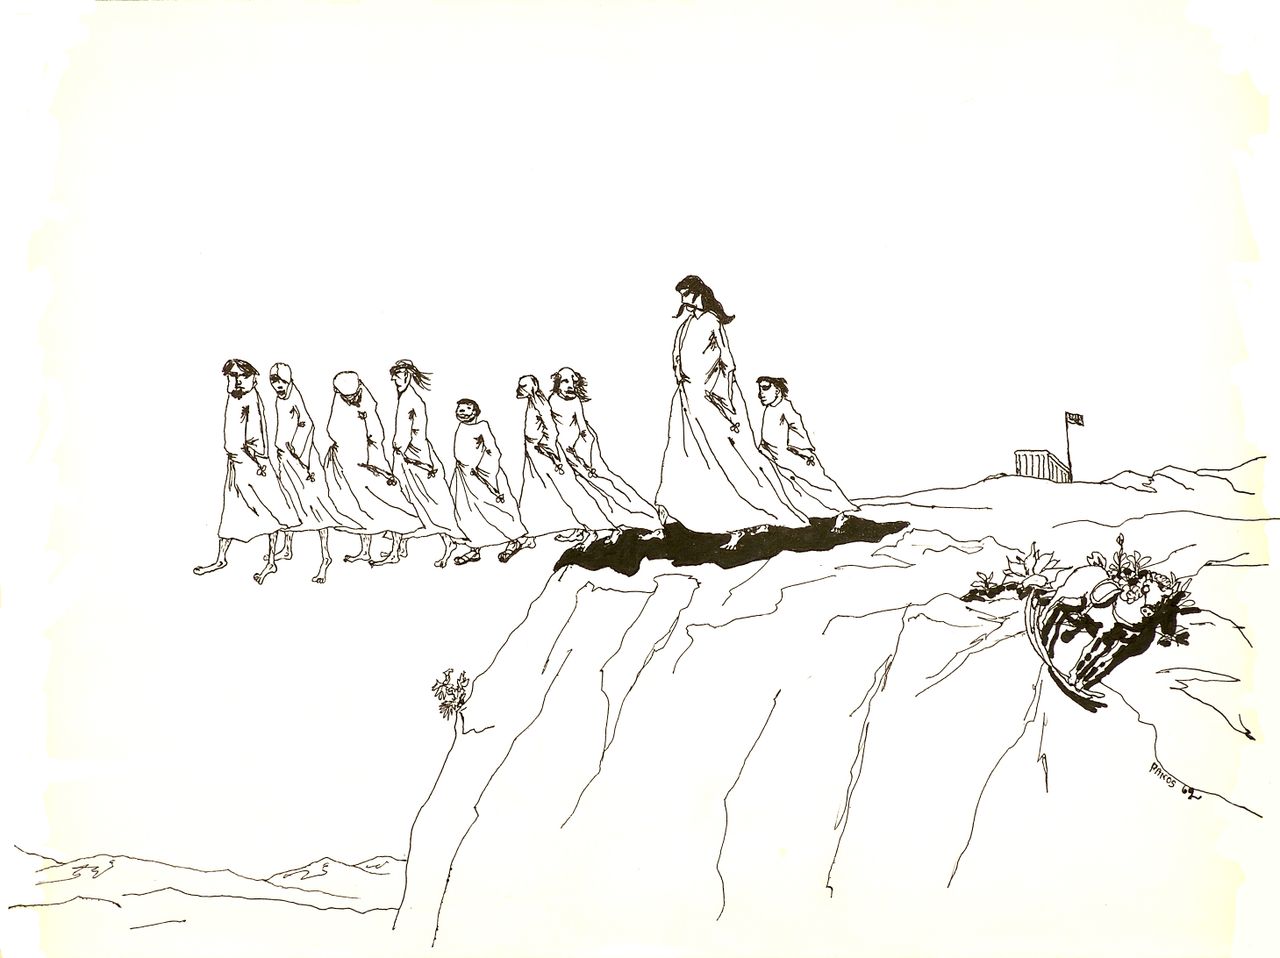  Panos Koutrouboussis, Afternoon walk, 1962, ink on paper, Private collection. 